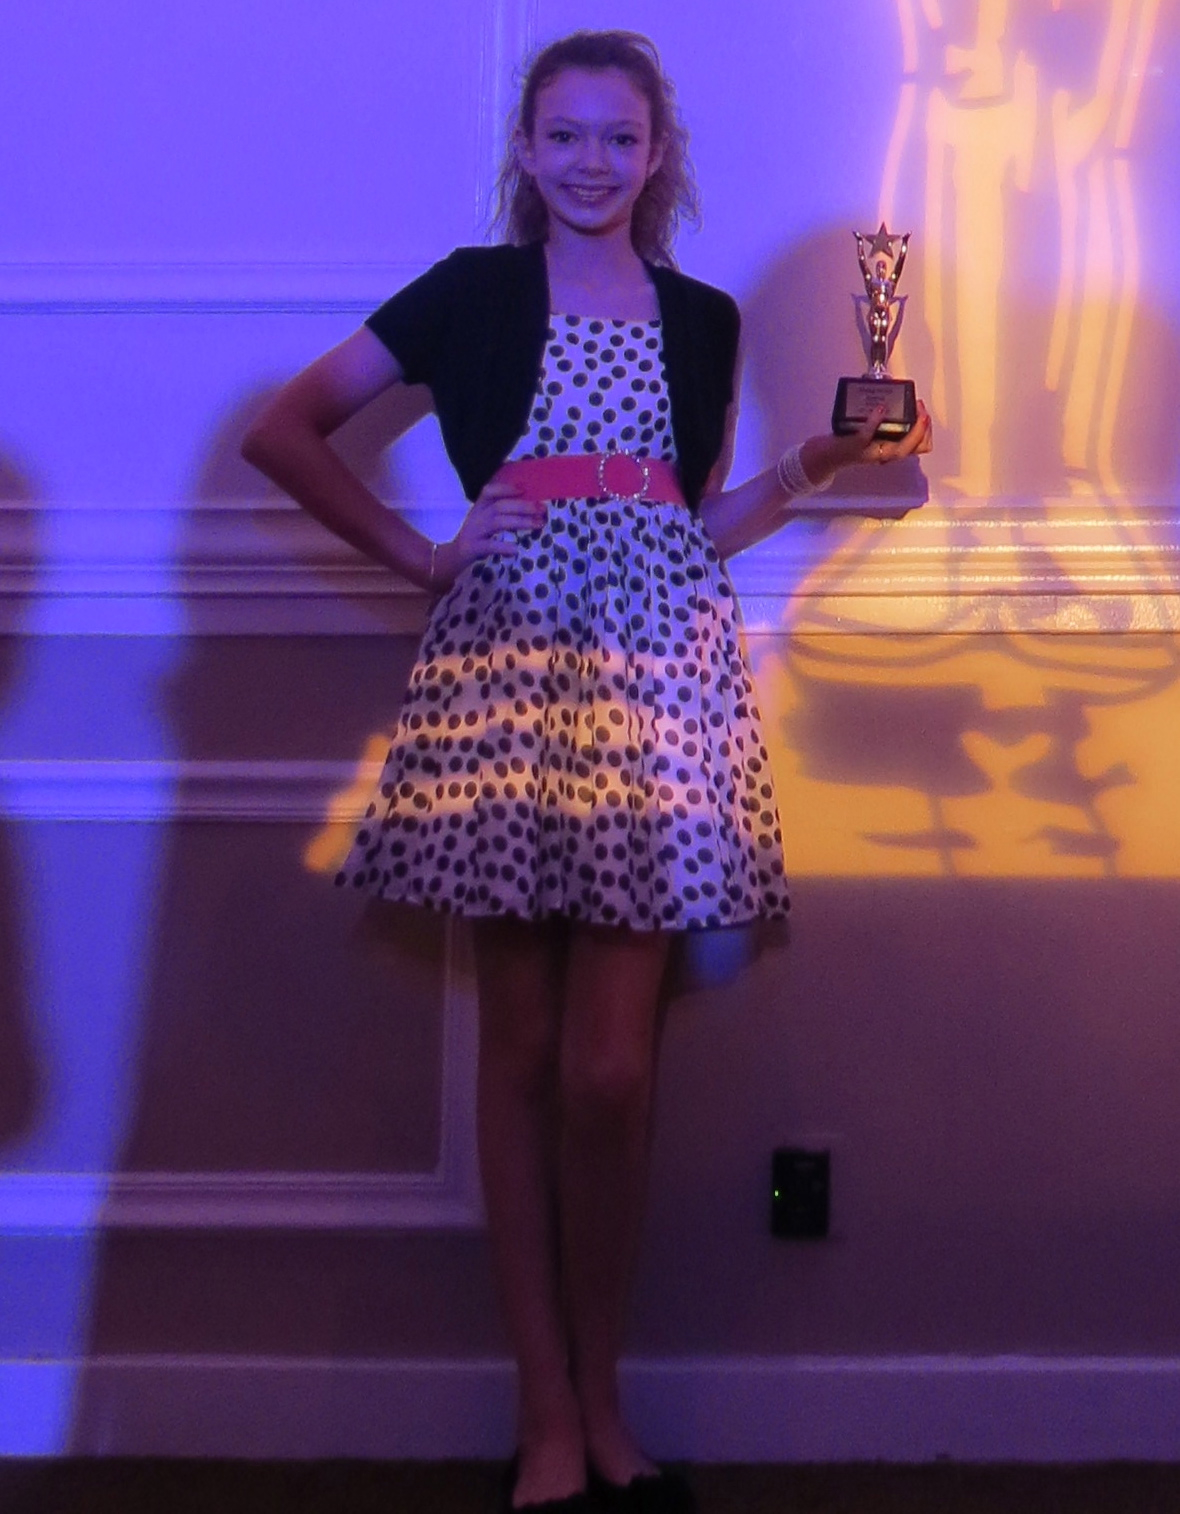 winner of 2013 award for Best Actress in a TV Series - Guest Starring role. 5/5/2013.